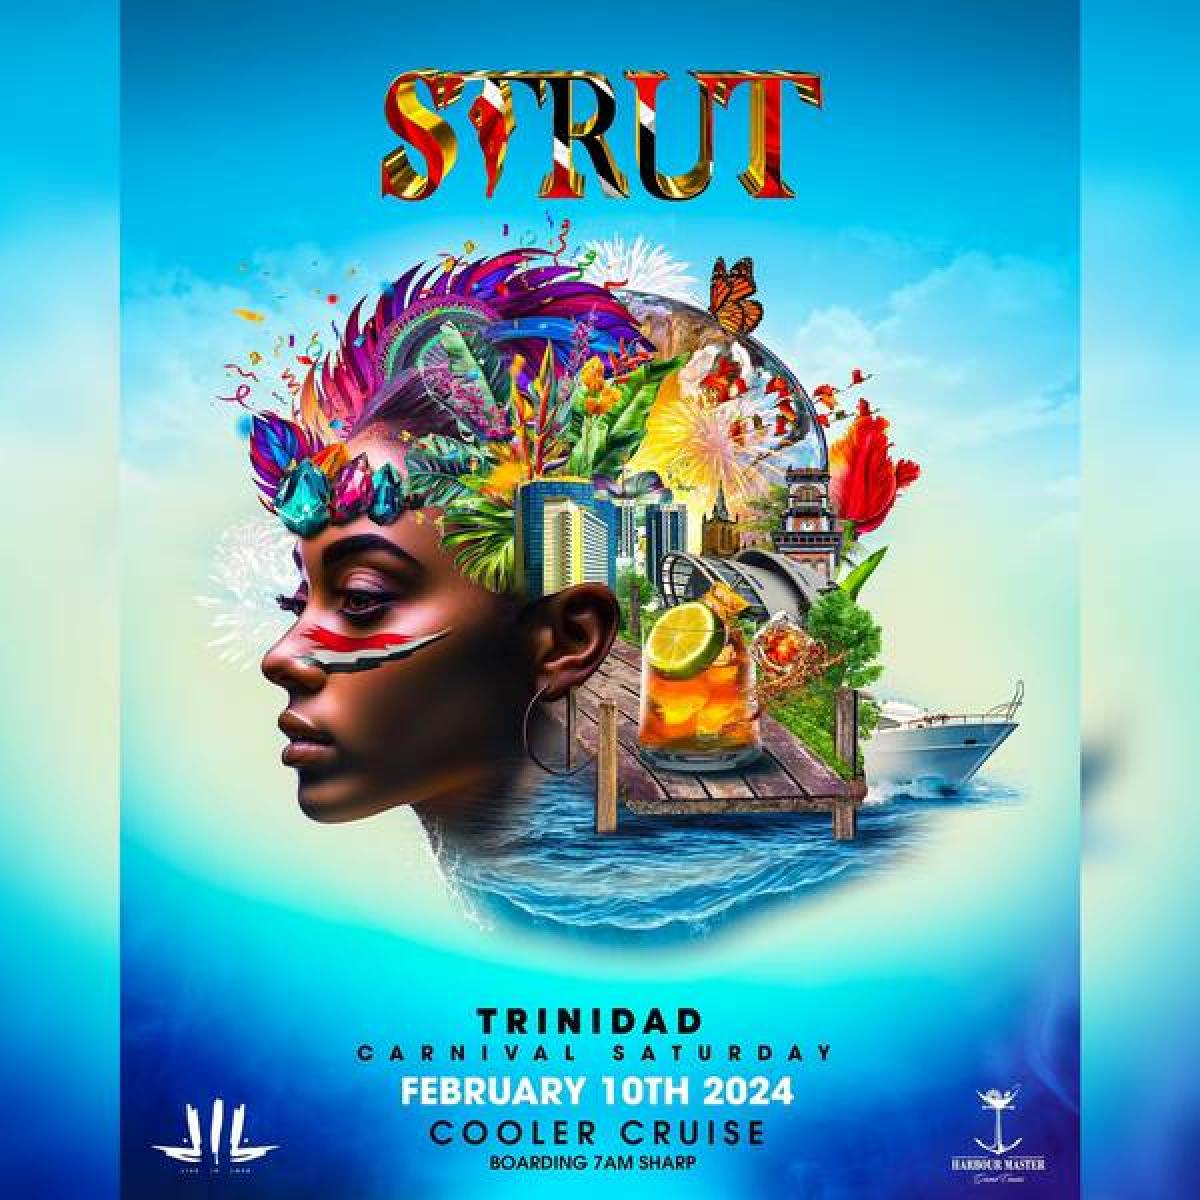 Strut Carnival Cooler Cruise flyer or graphic.